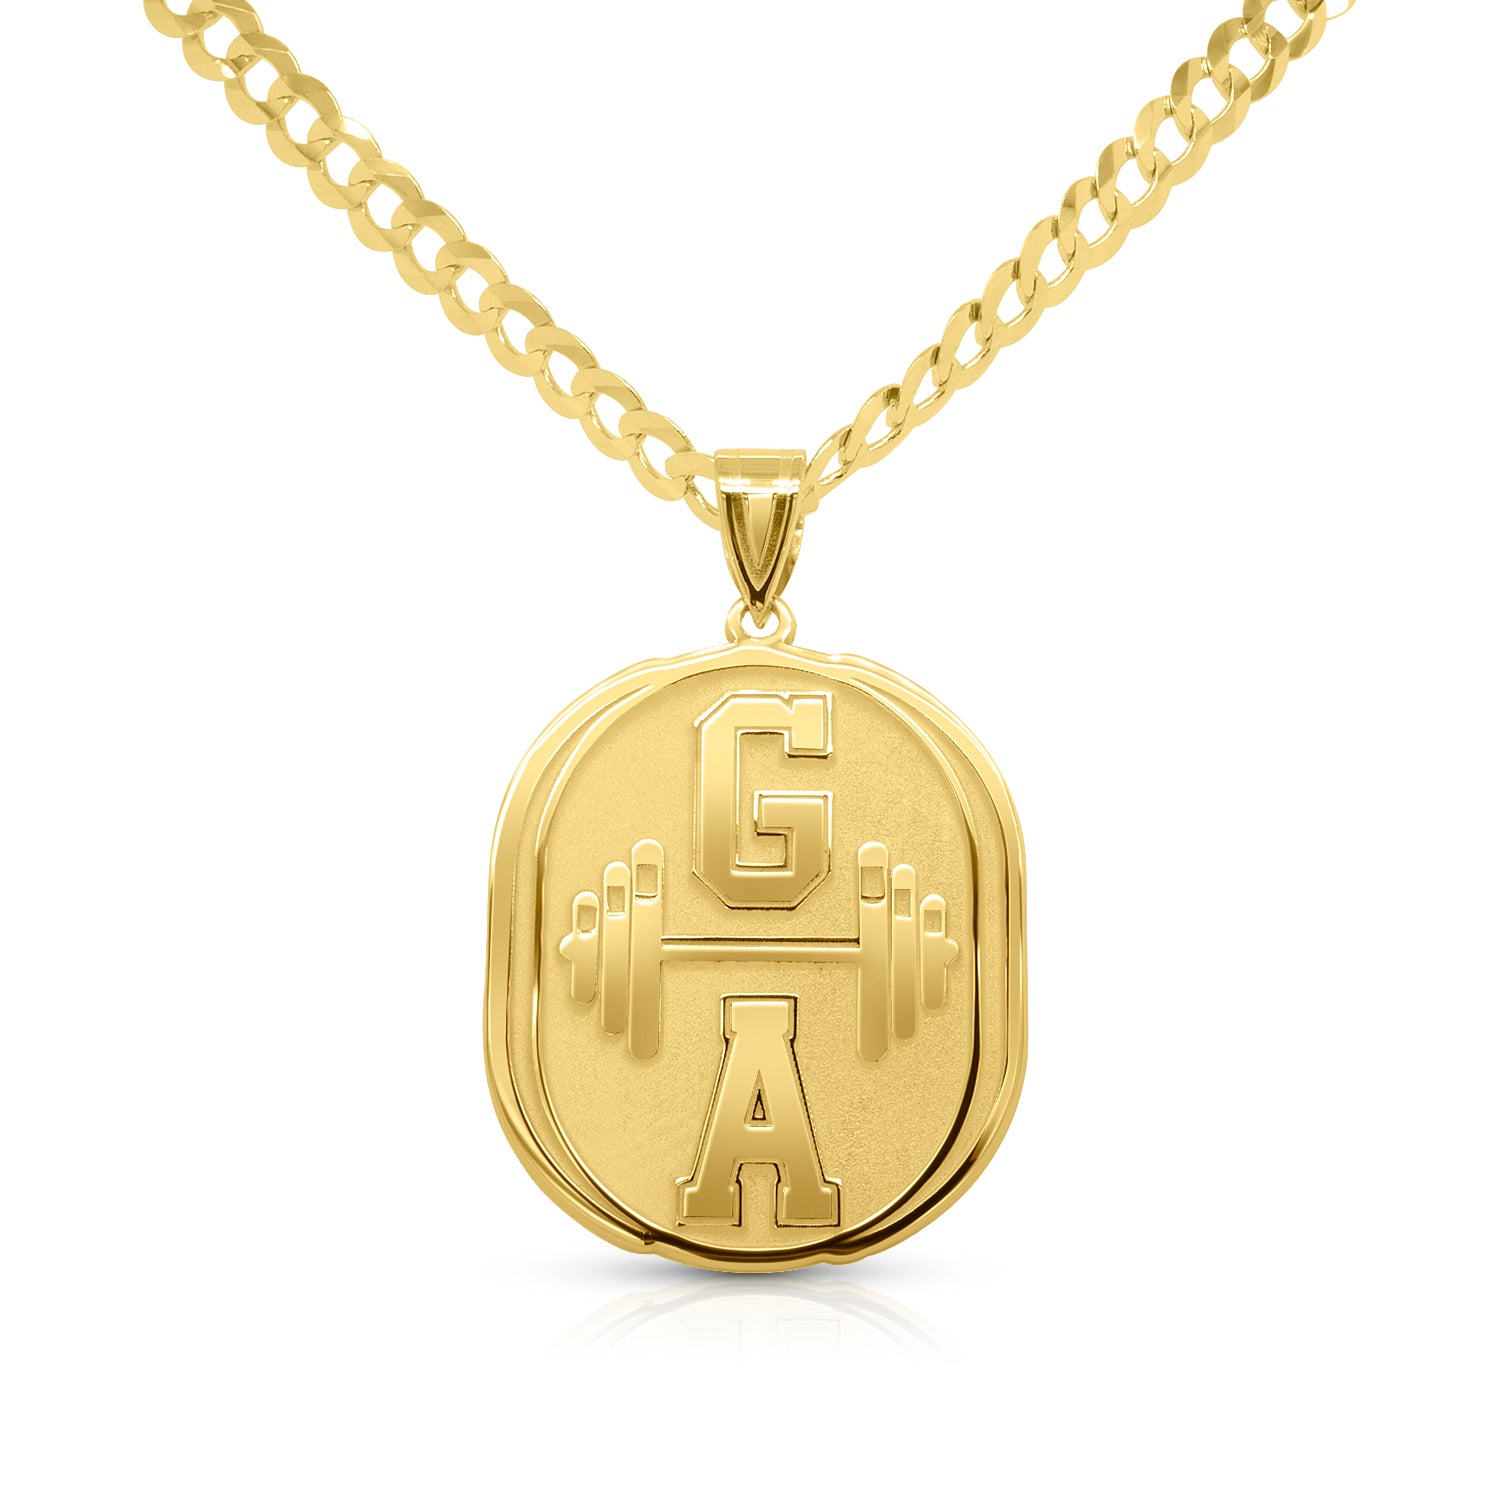 Gold necklace with a coin-shaped pendant with an engraved letter ona white background